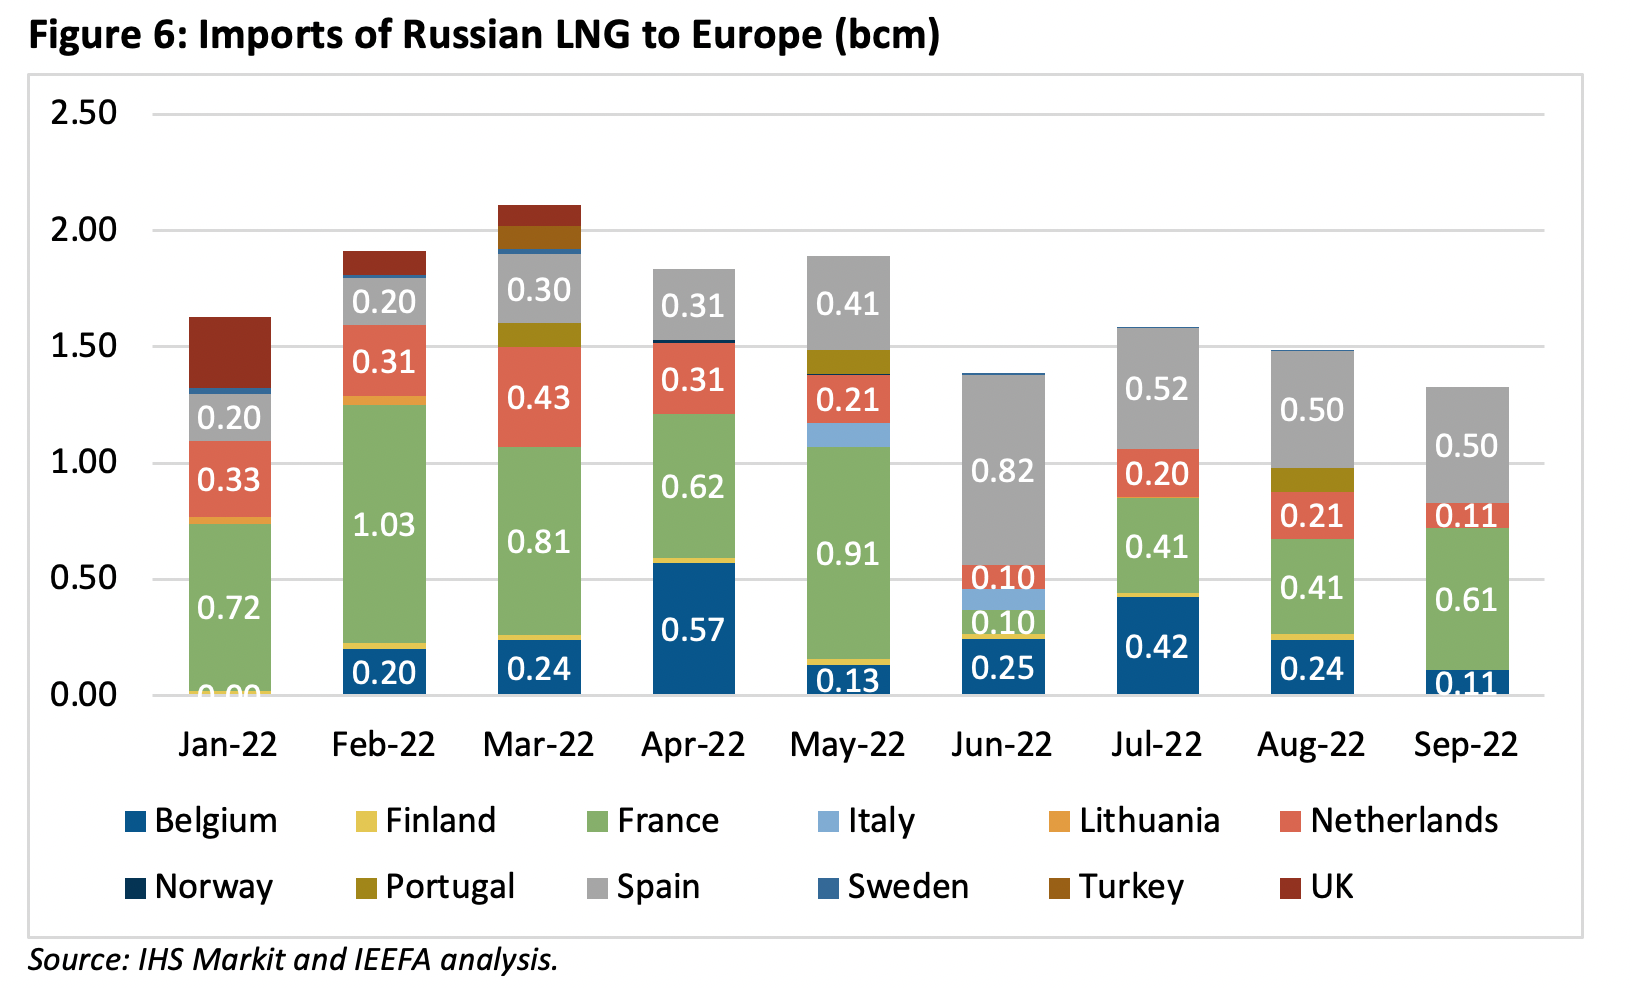 Imports of Russian LNG to Europe